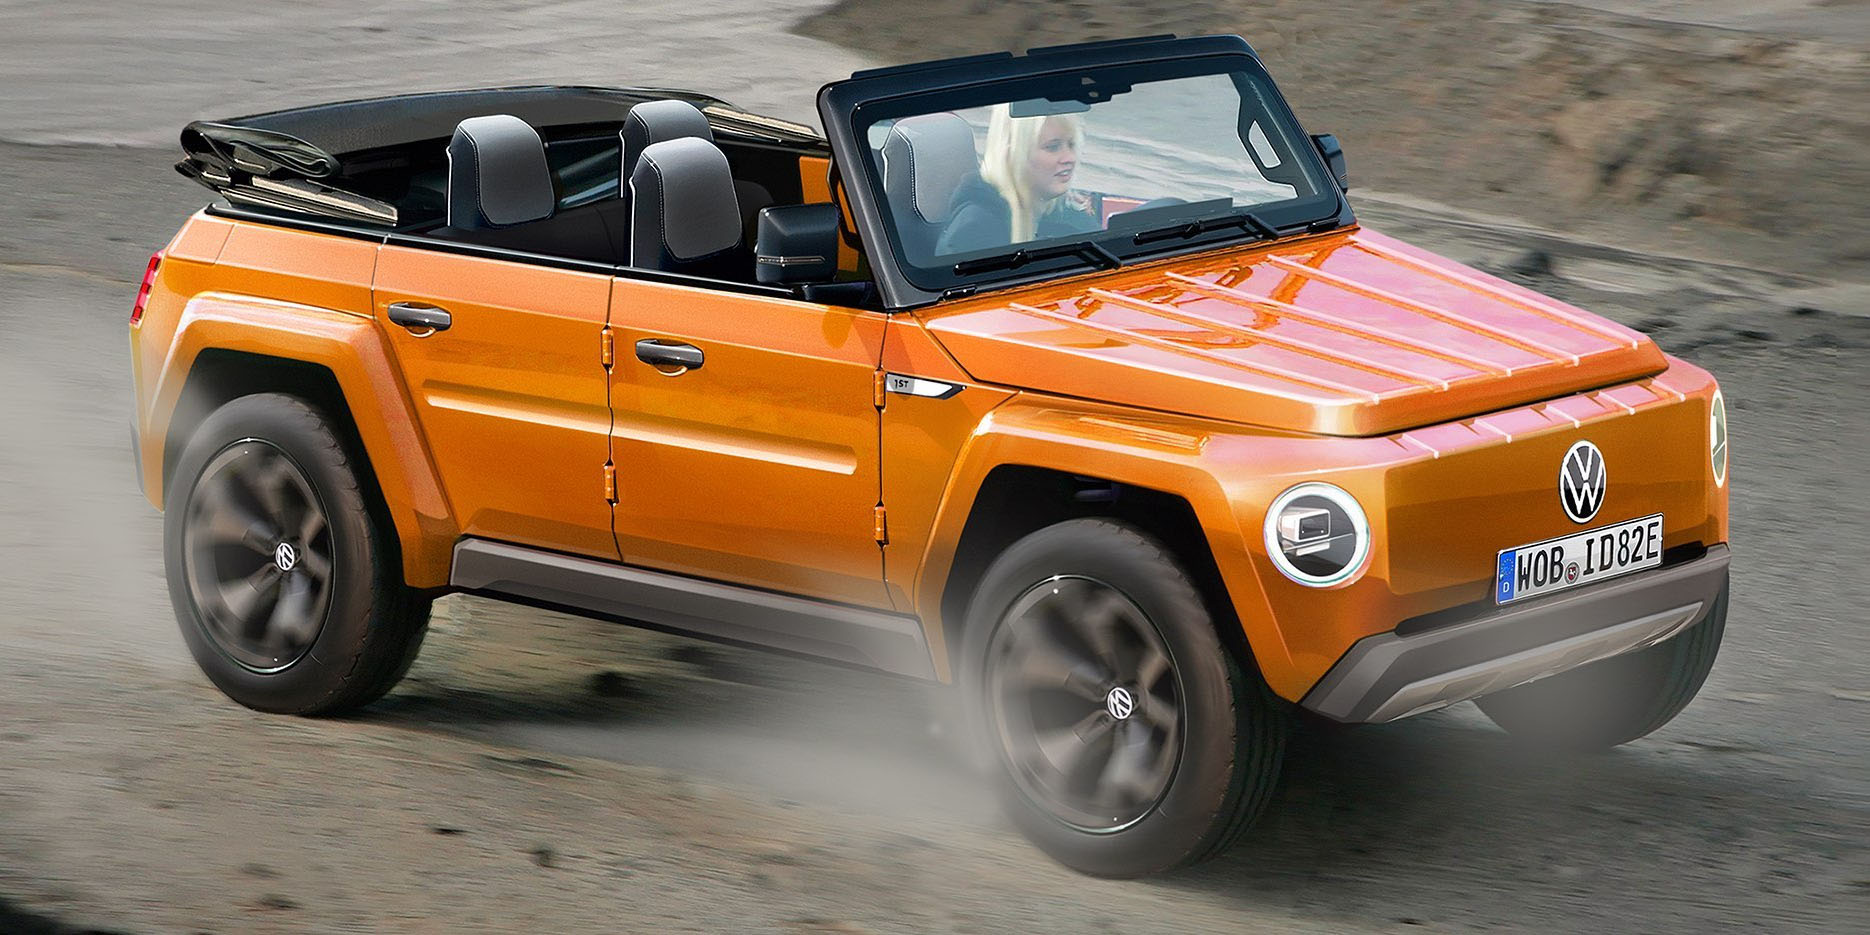 https://s1.cdn.autoevolution.com/images/news/gallery/vw-e-thing-rendering-shows-g-class-like-potential-resurrection-of-the-type_4.jpg